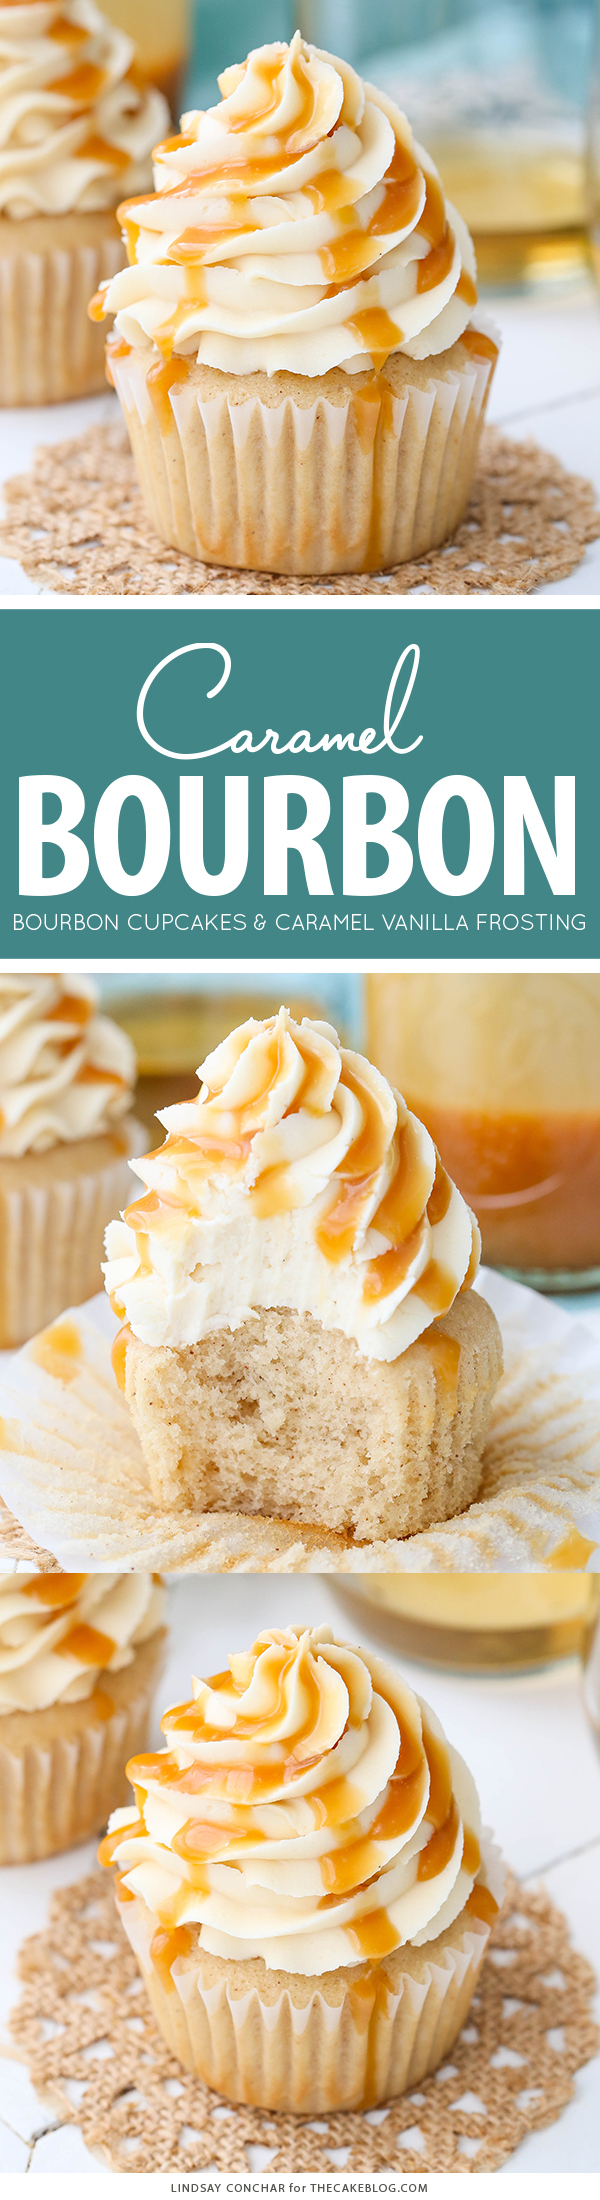 Caramel Bourbon Vanilla Cupcakes - a brown sugar bourbon cupcake topped with caramel vanilla frosting for a unique combination that is full of flavor!